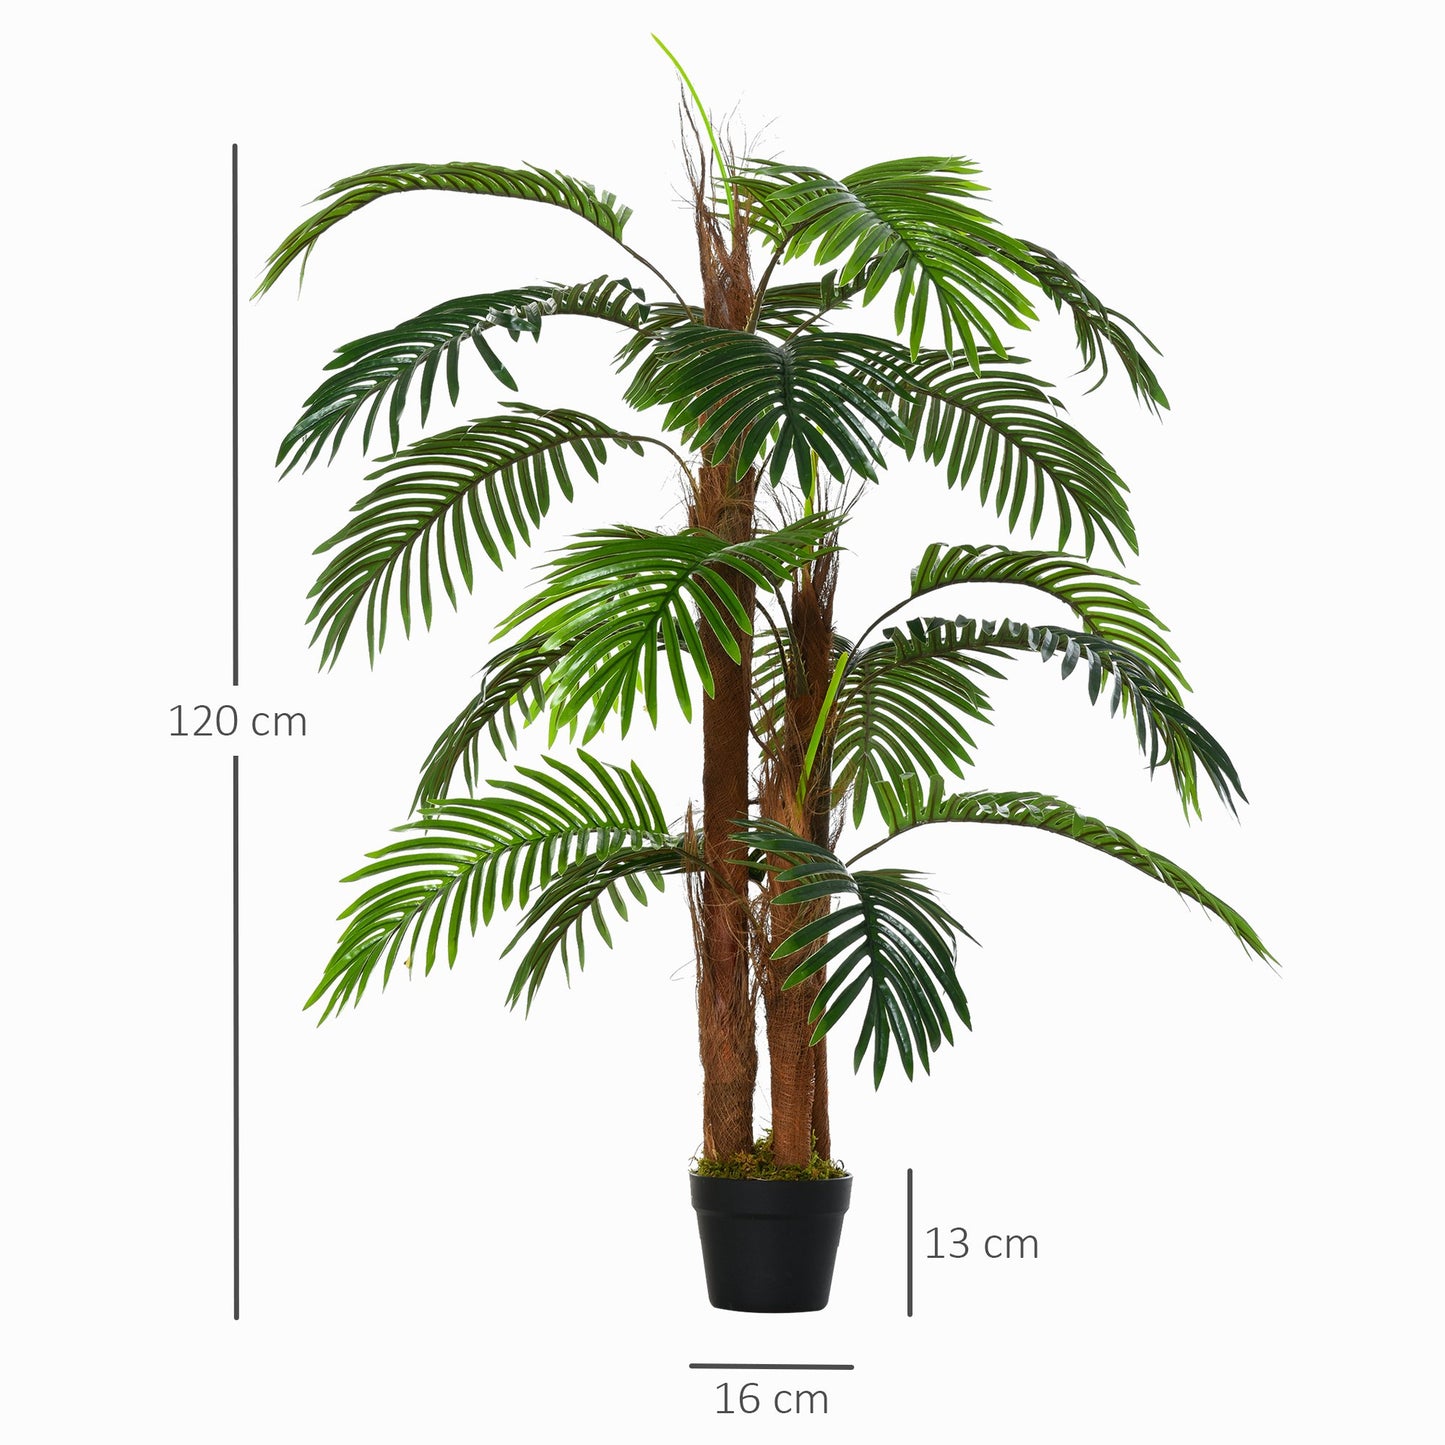 Outsunny 120cm/4FT Artificial Palm Tree Decorative Plant  w/ 19 Leaves Nursery Pot Fake Plastic Indoor Outdoor Greenery Home Office Décor